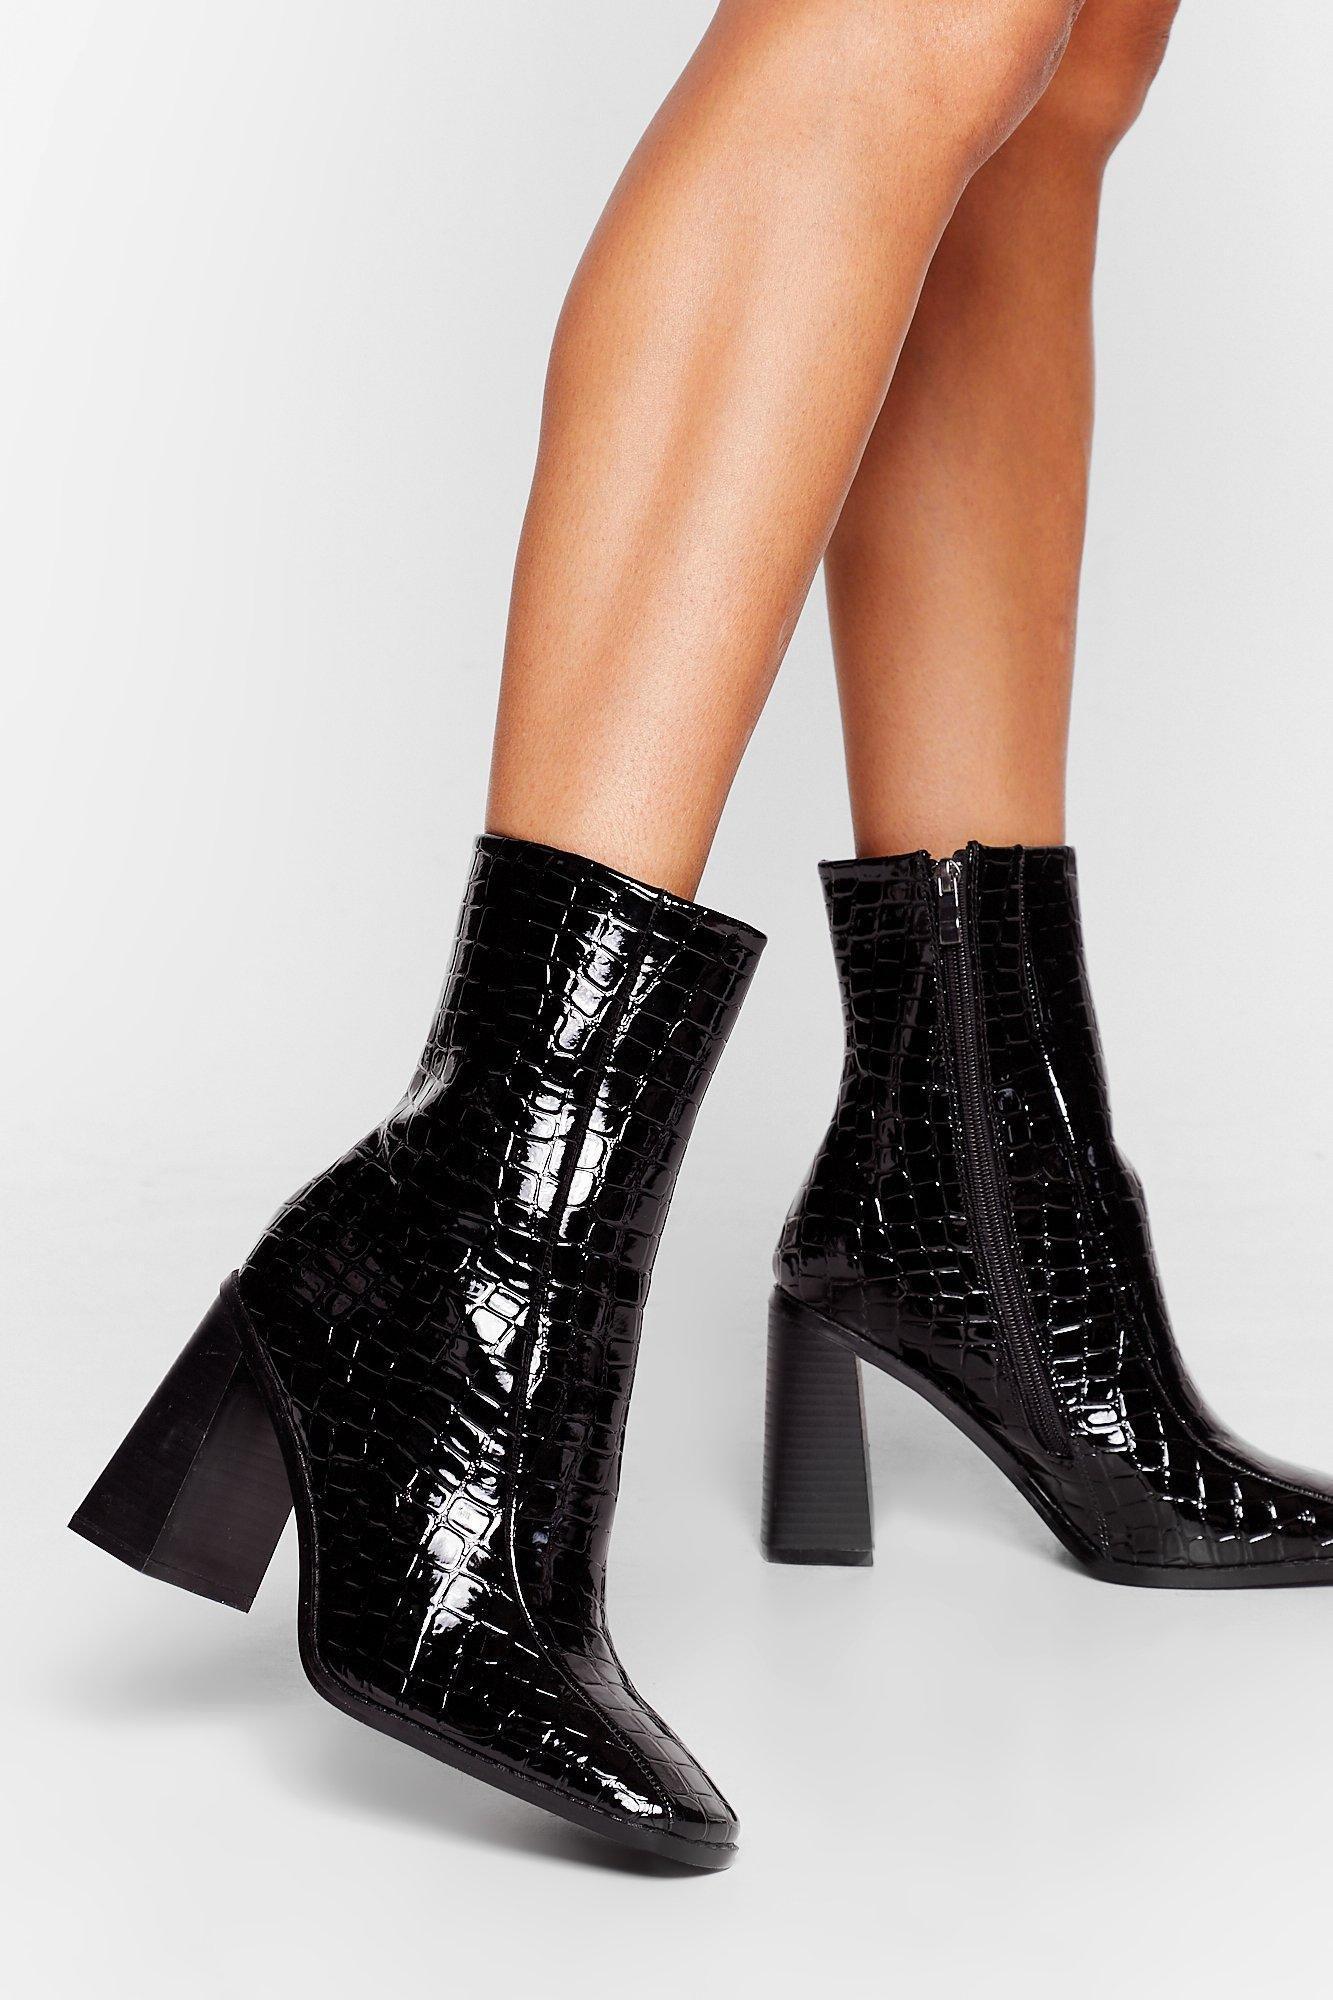 Boohoo Taking Flare Of Business Croc Heeled Boots in Black | Lyst